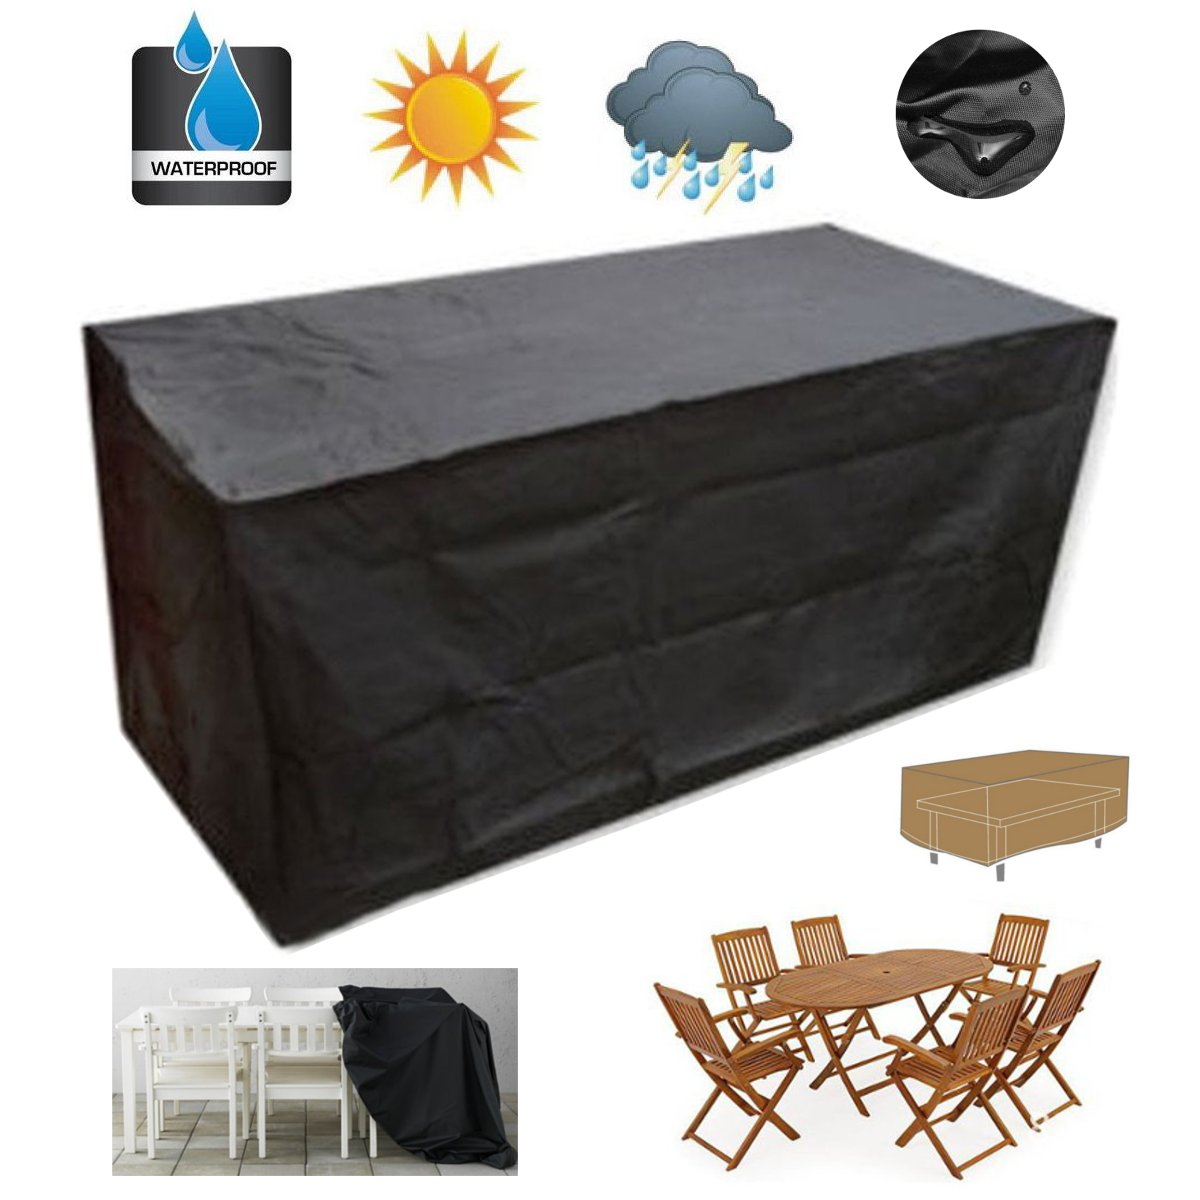 Us 1584 52 Off18012074cm Garden Patio Chair Outdoor Furniture Sofa Cover Waterproof Polyester Pvc Coated Table Desk Black Silver Color In Sofa in dimensions 1200 X 1200